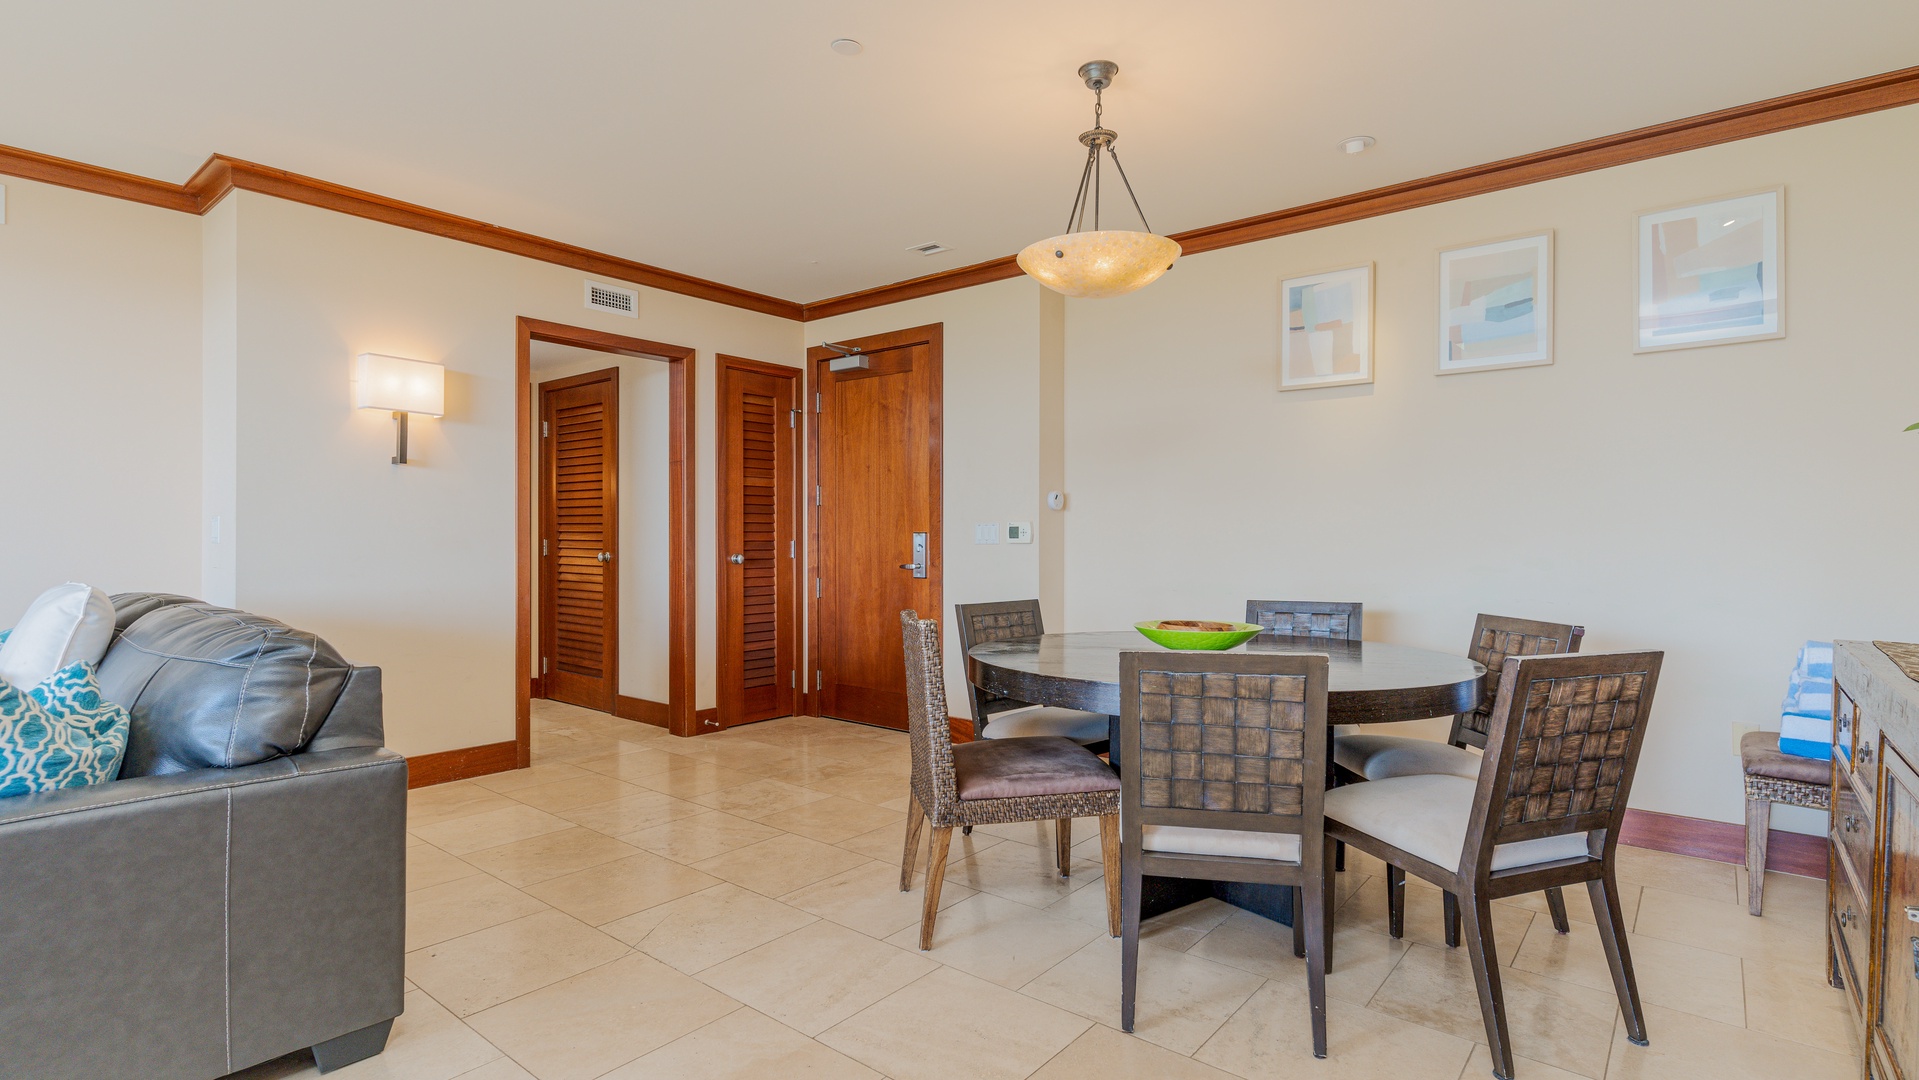 Kapolei Vacation Rentals, Ko Olina Beach Villas O425 - Dine in under boutique lighting and the privacy of your own home.